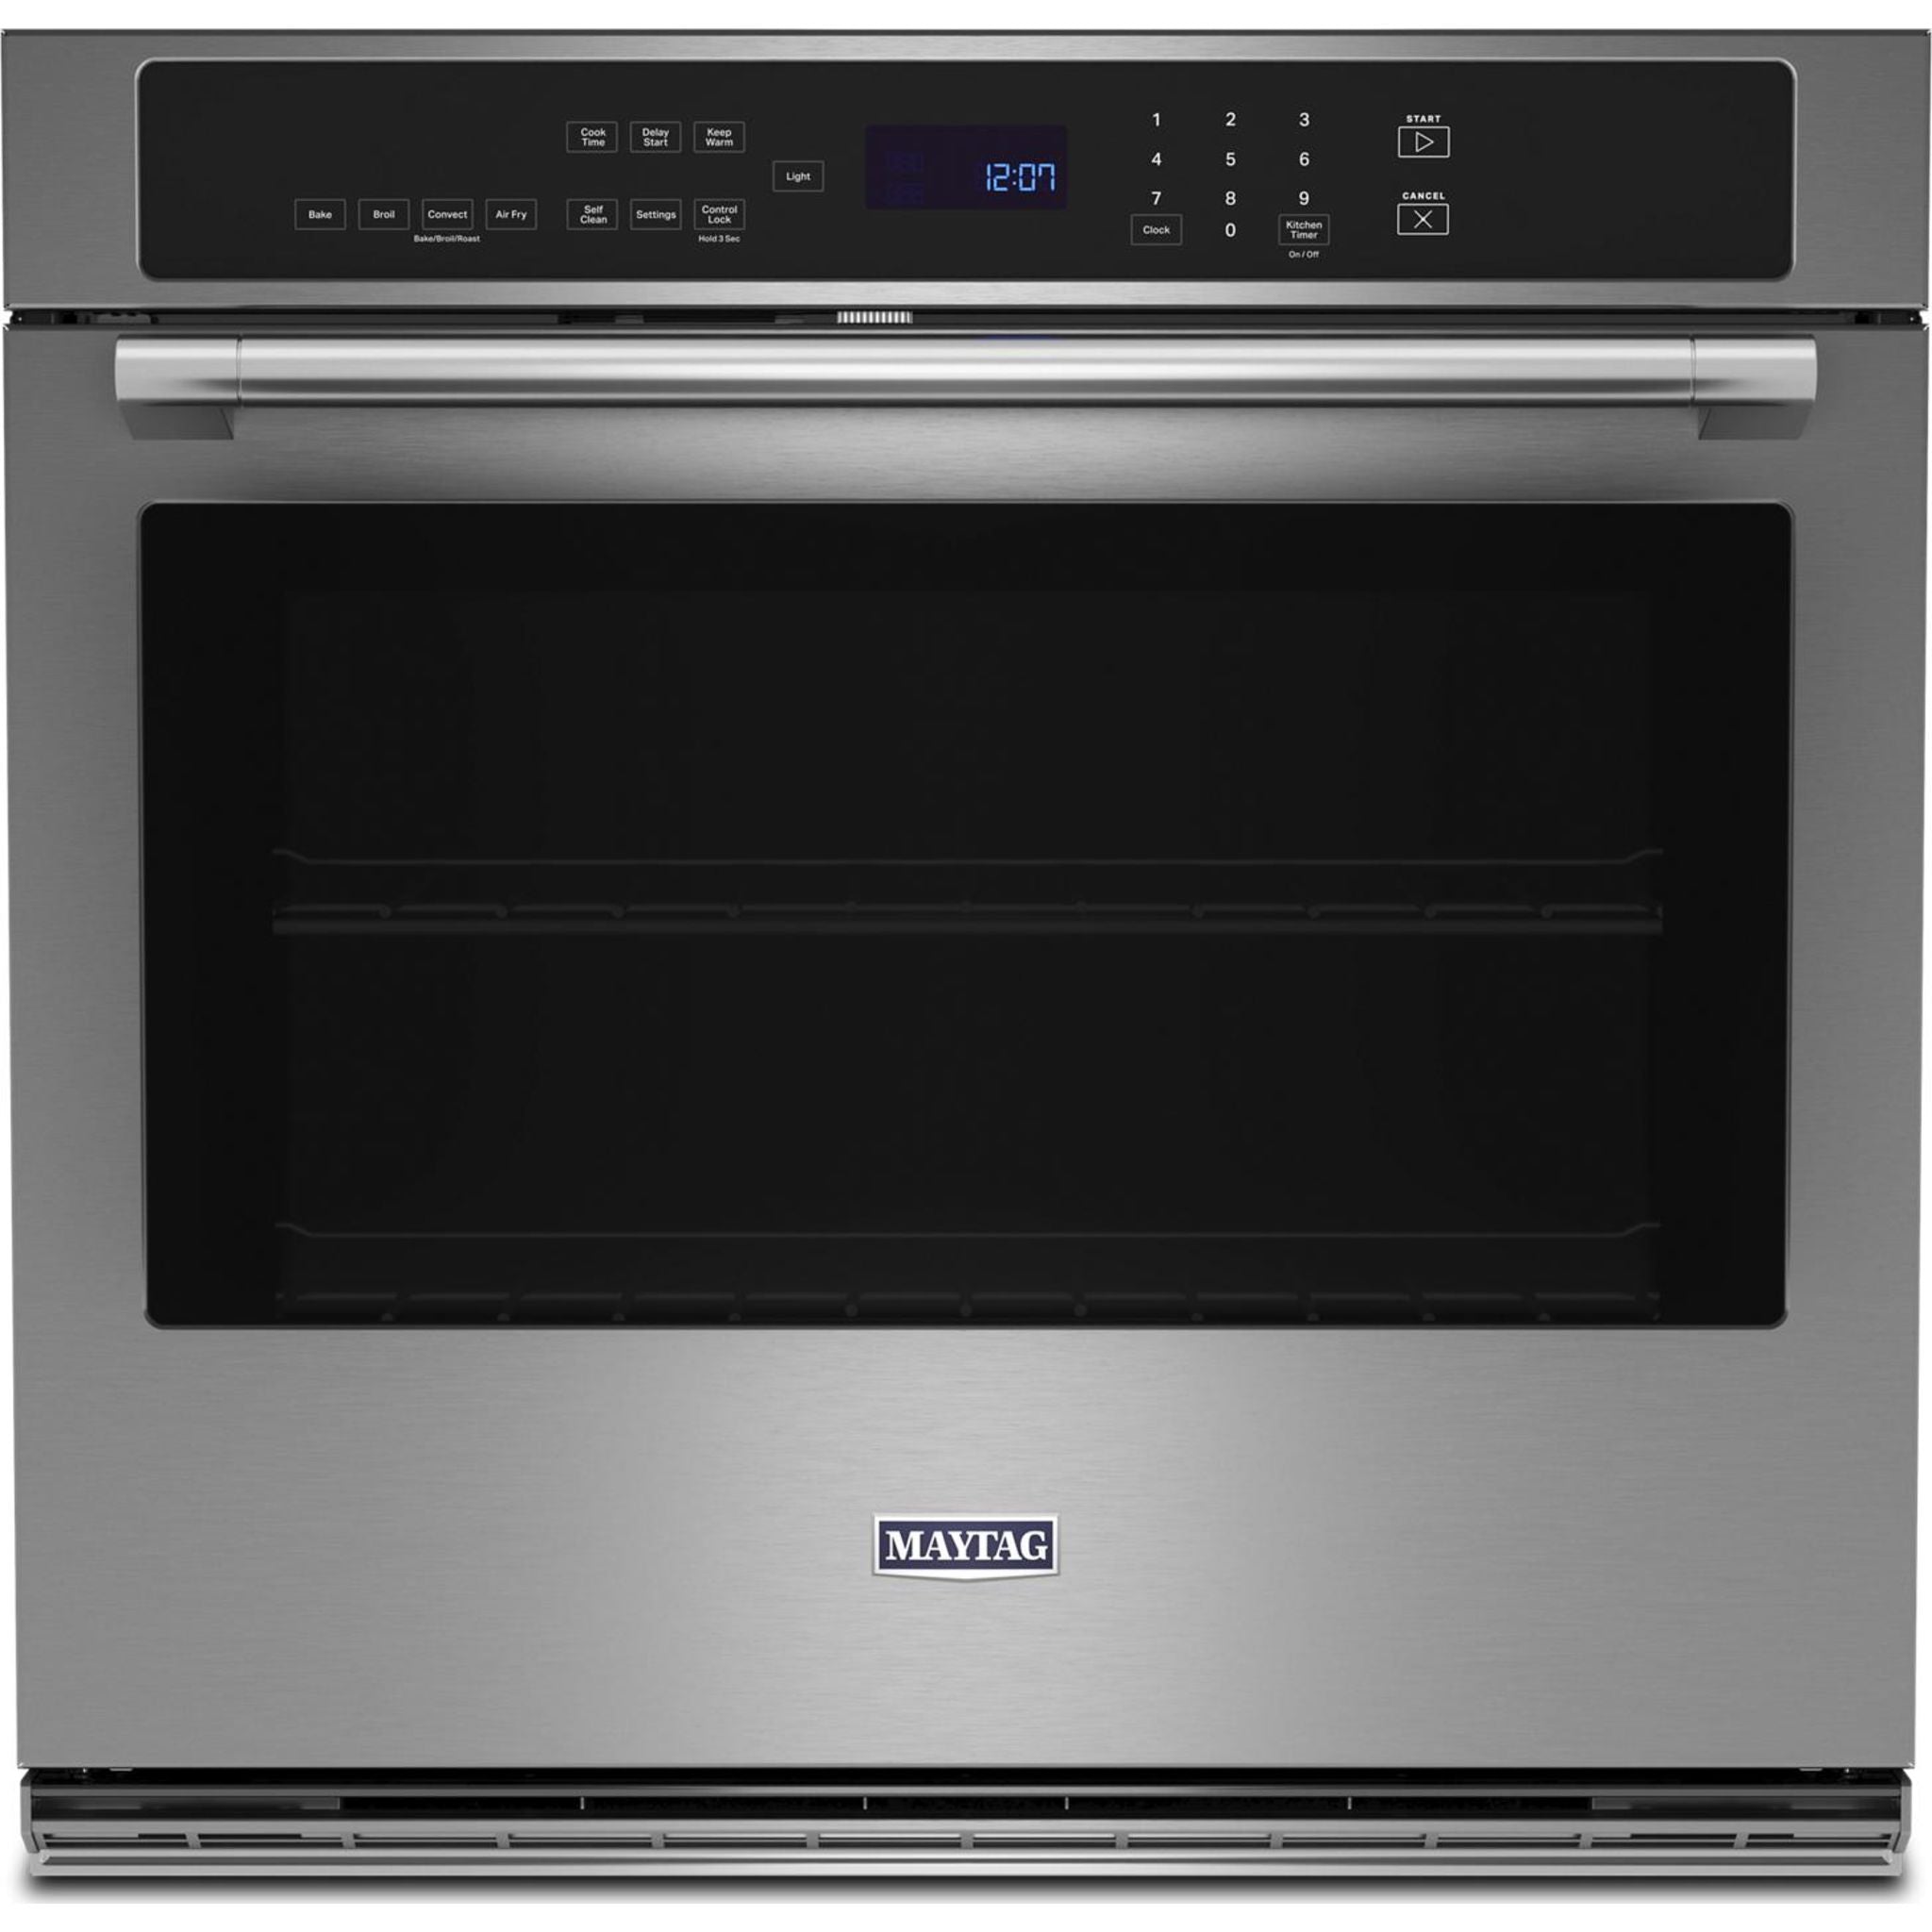 Maytag, Maytag 27" Convection Wall Oven (MOES6027LZ) - Fingerprint Resistant Stainless Steel